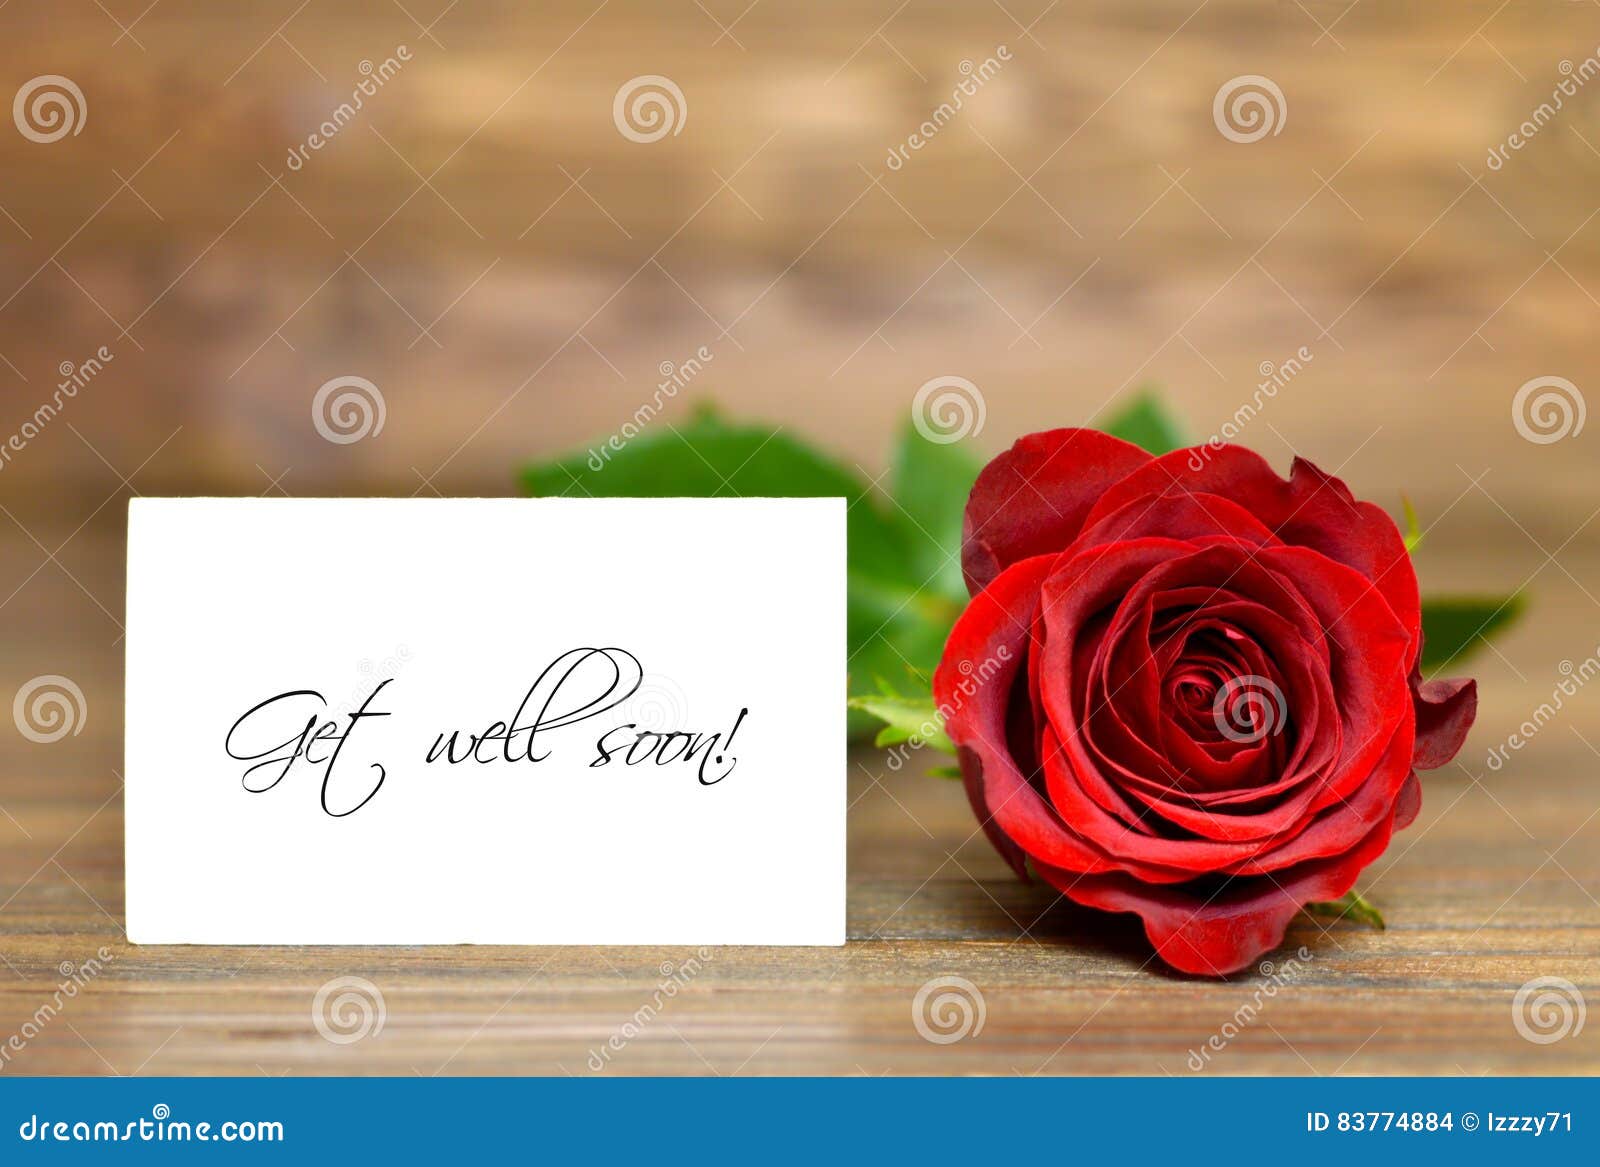 Get well soon stock photo. Image of celebration, gift - 83774884